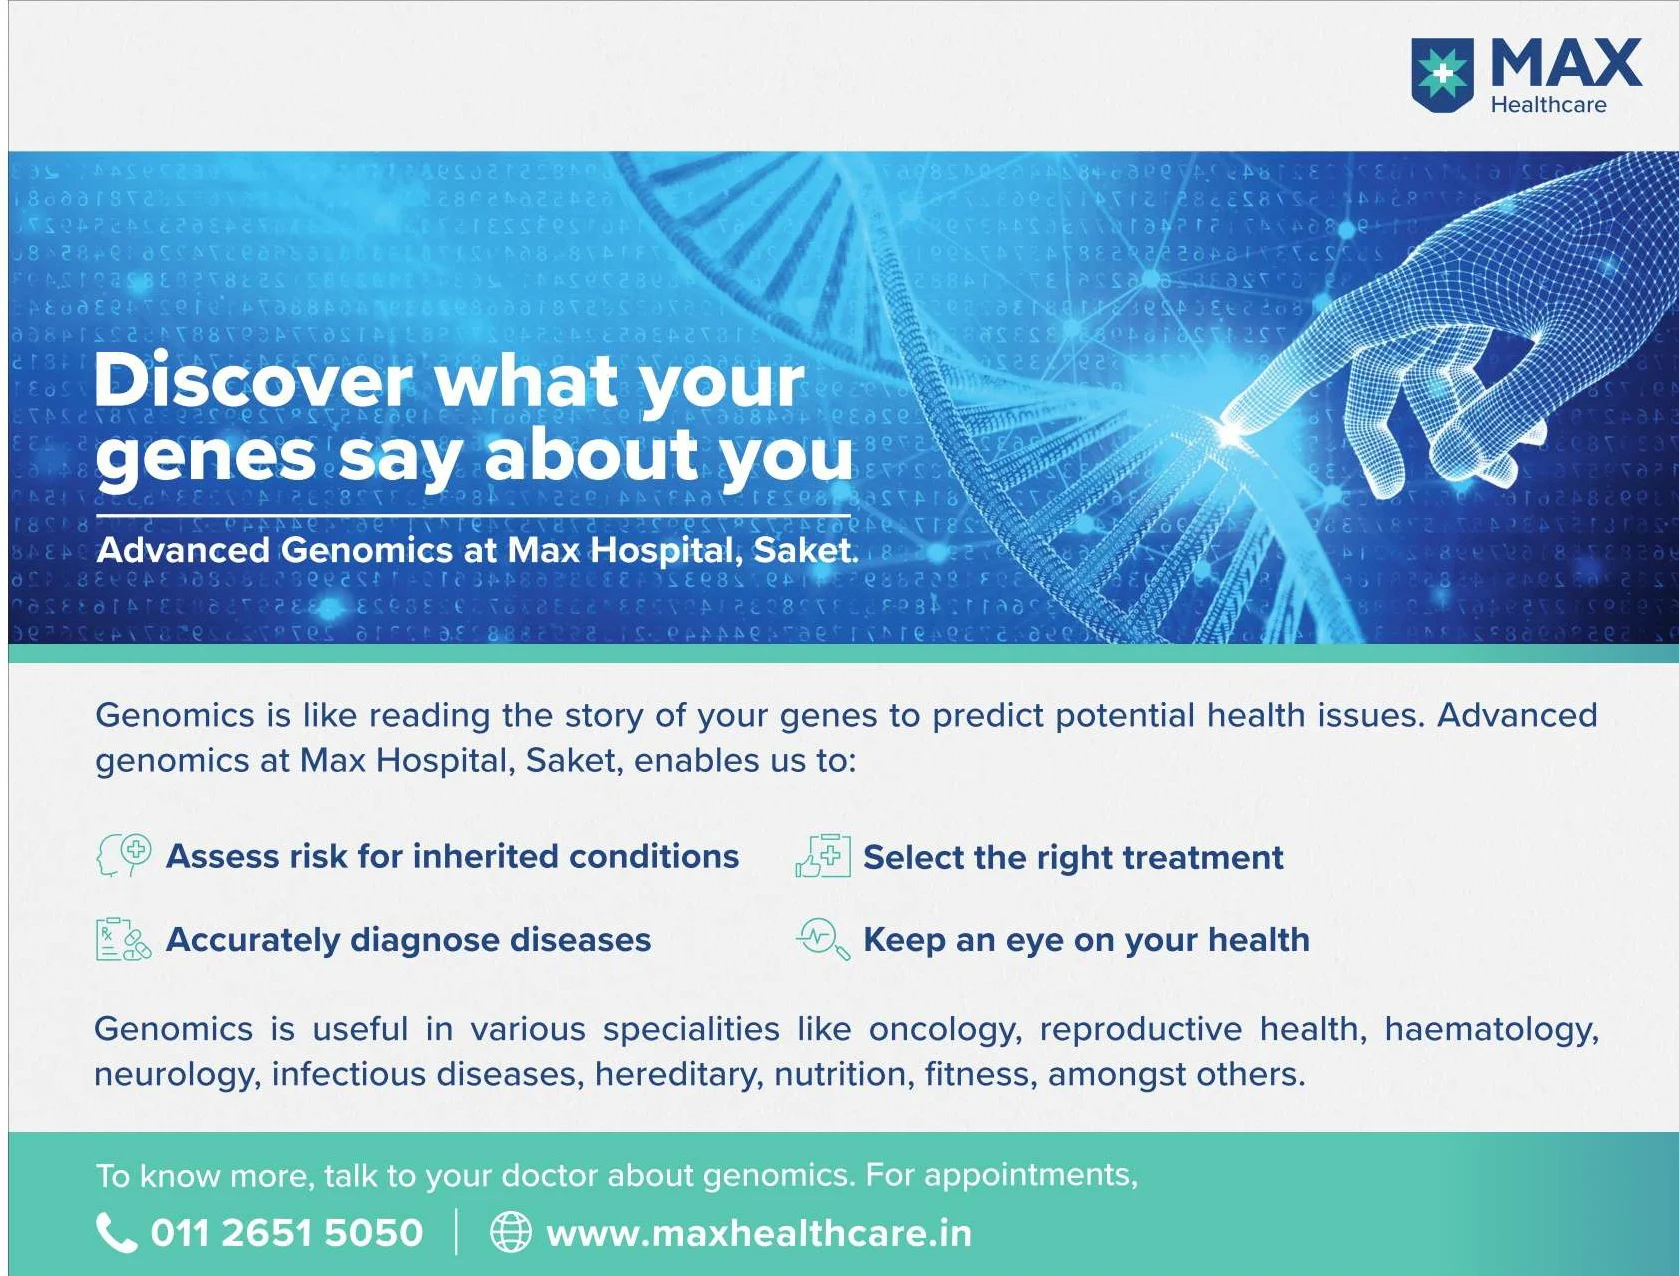 Max Healthcare: The Genetic Gateway